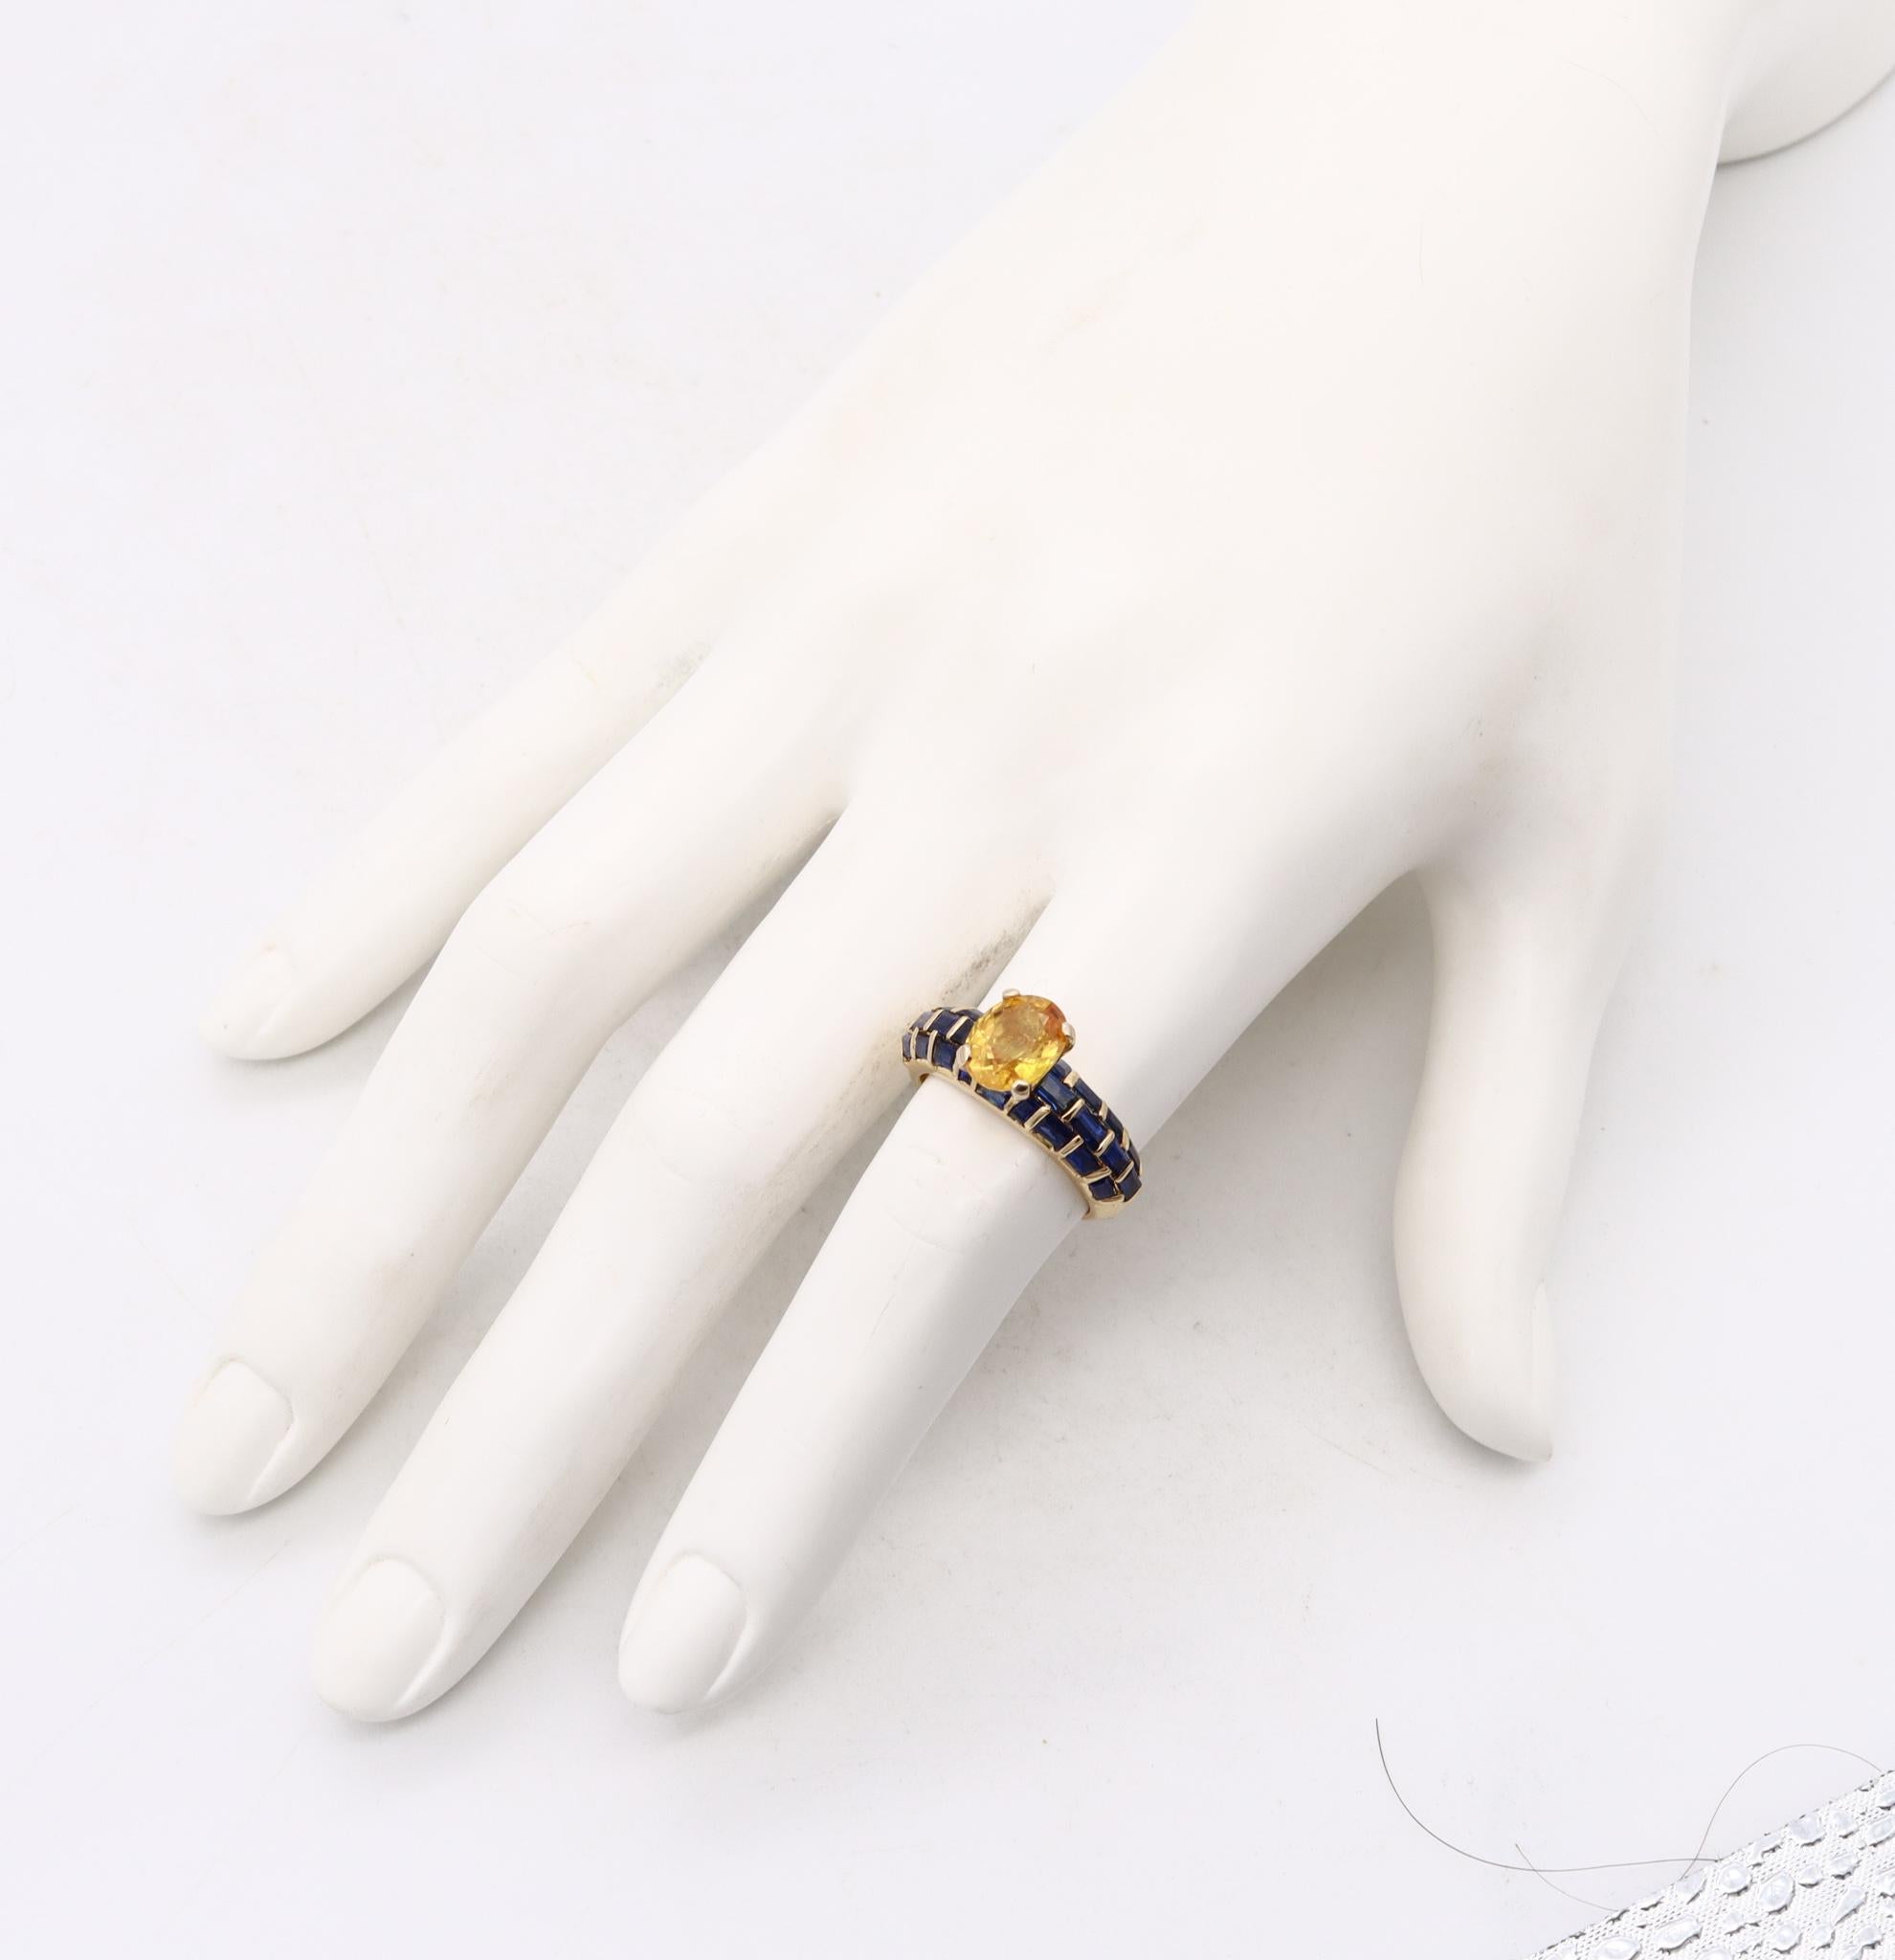 Sabbadini Milano Jeweled Ring 18kt Gold with 4.49 Cts Blue and Yellow Sapphires 3